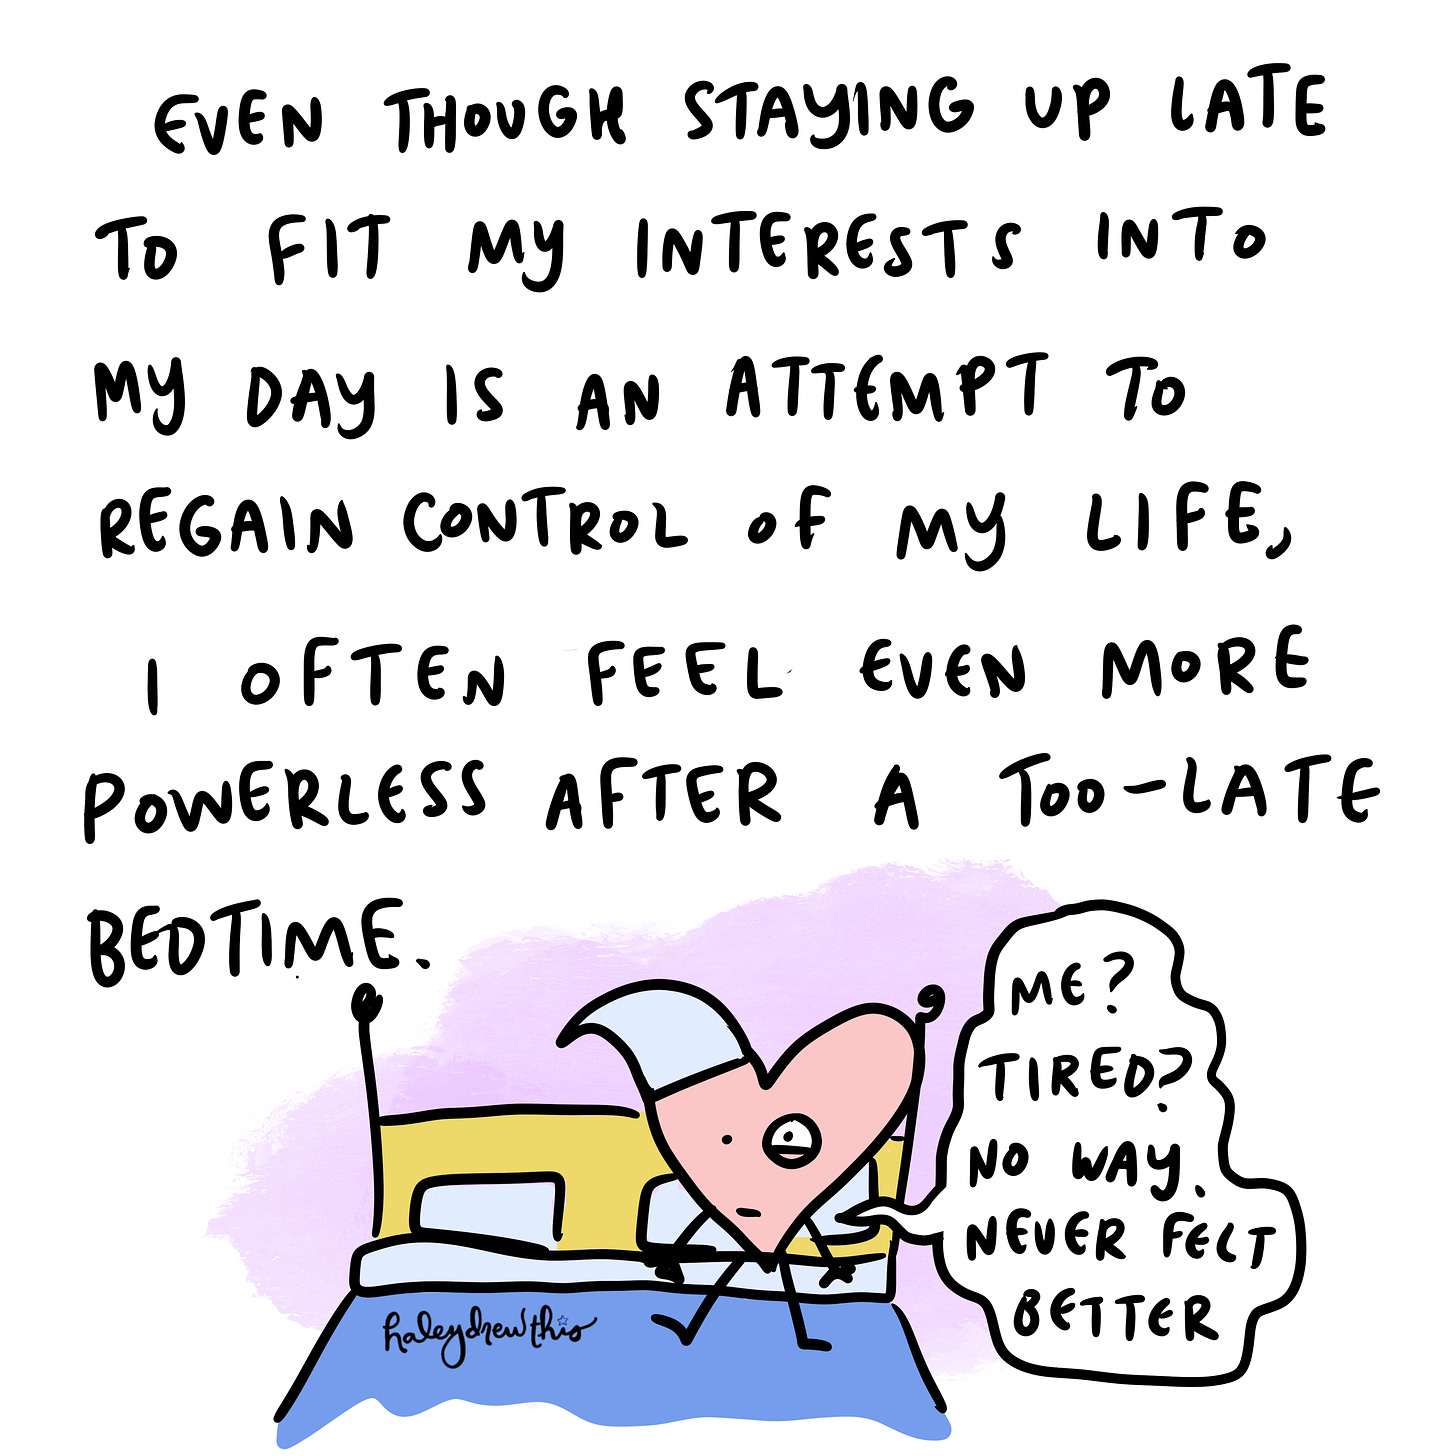 Even though staying up late to fit my interests into my day is an attempt to regain control of my life, it doesn't always work. 